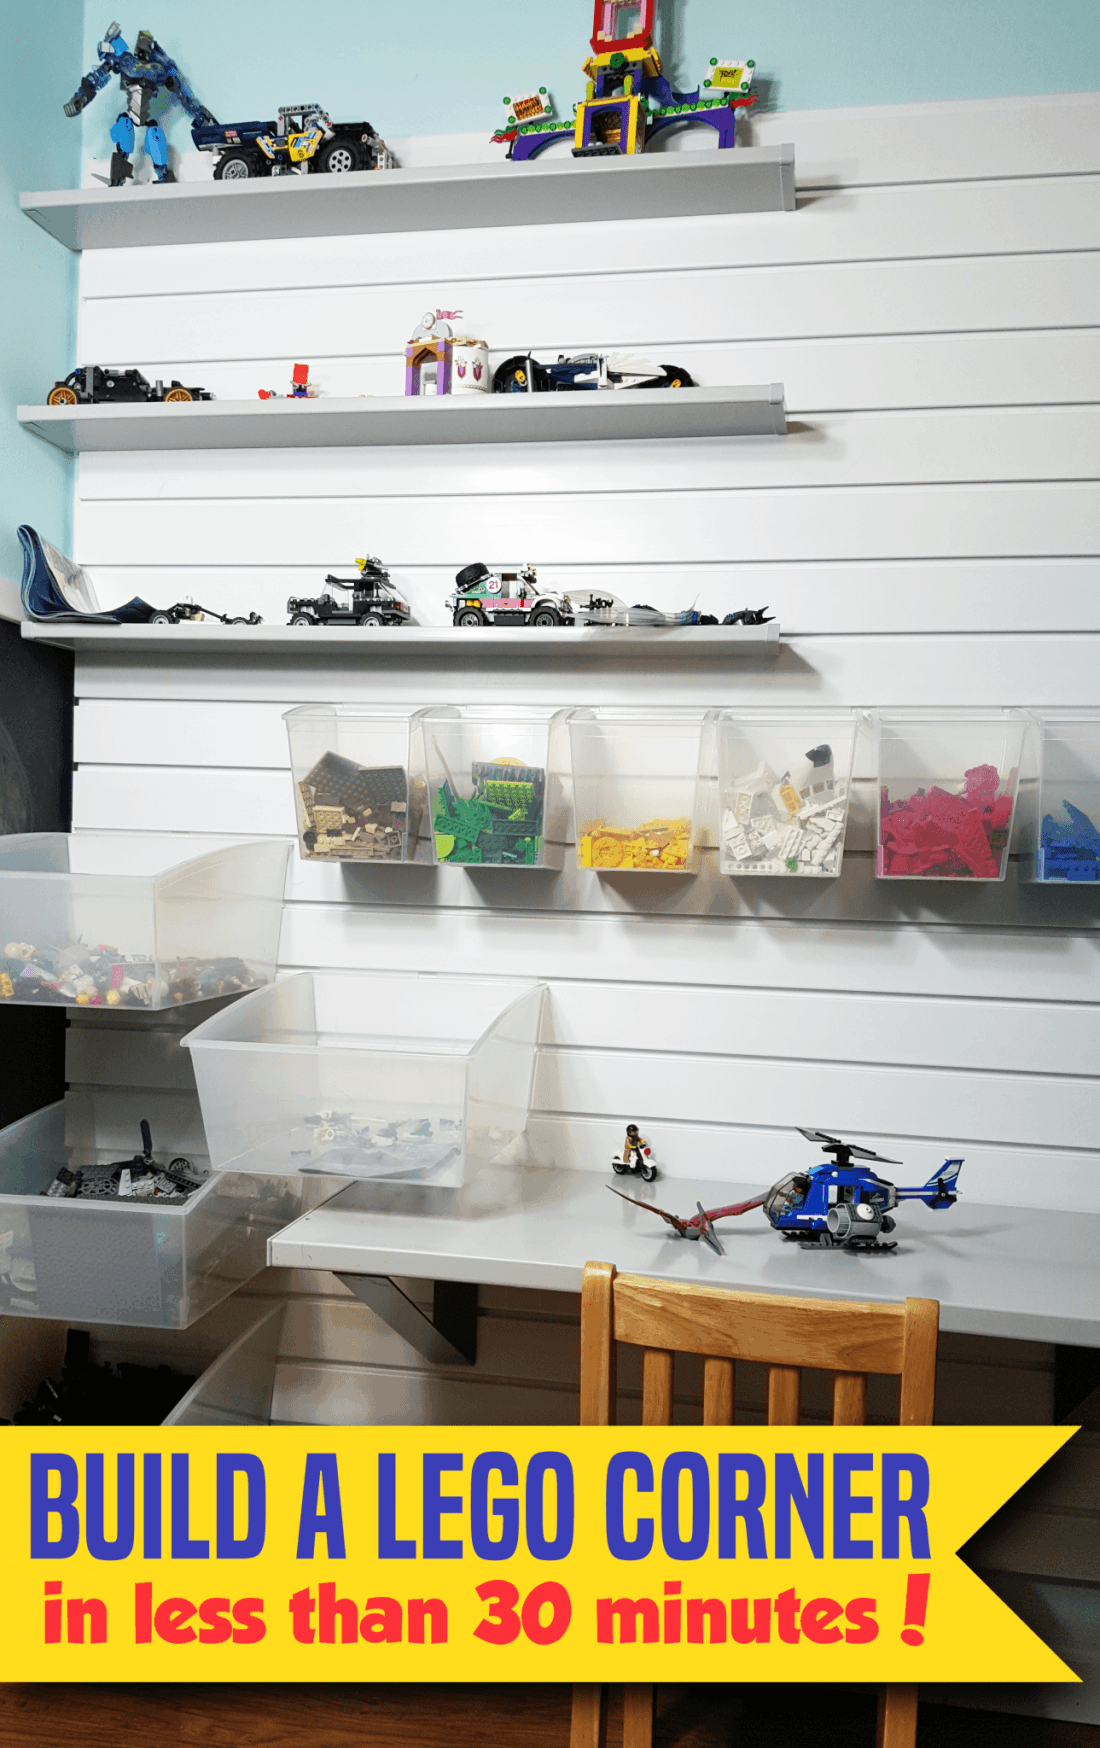 Let’s Build A Lego Corner! How To Make A Perfect Play Area In 30 Minutes